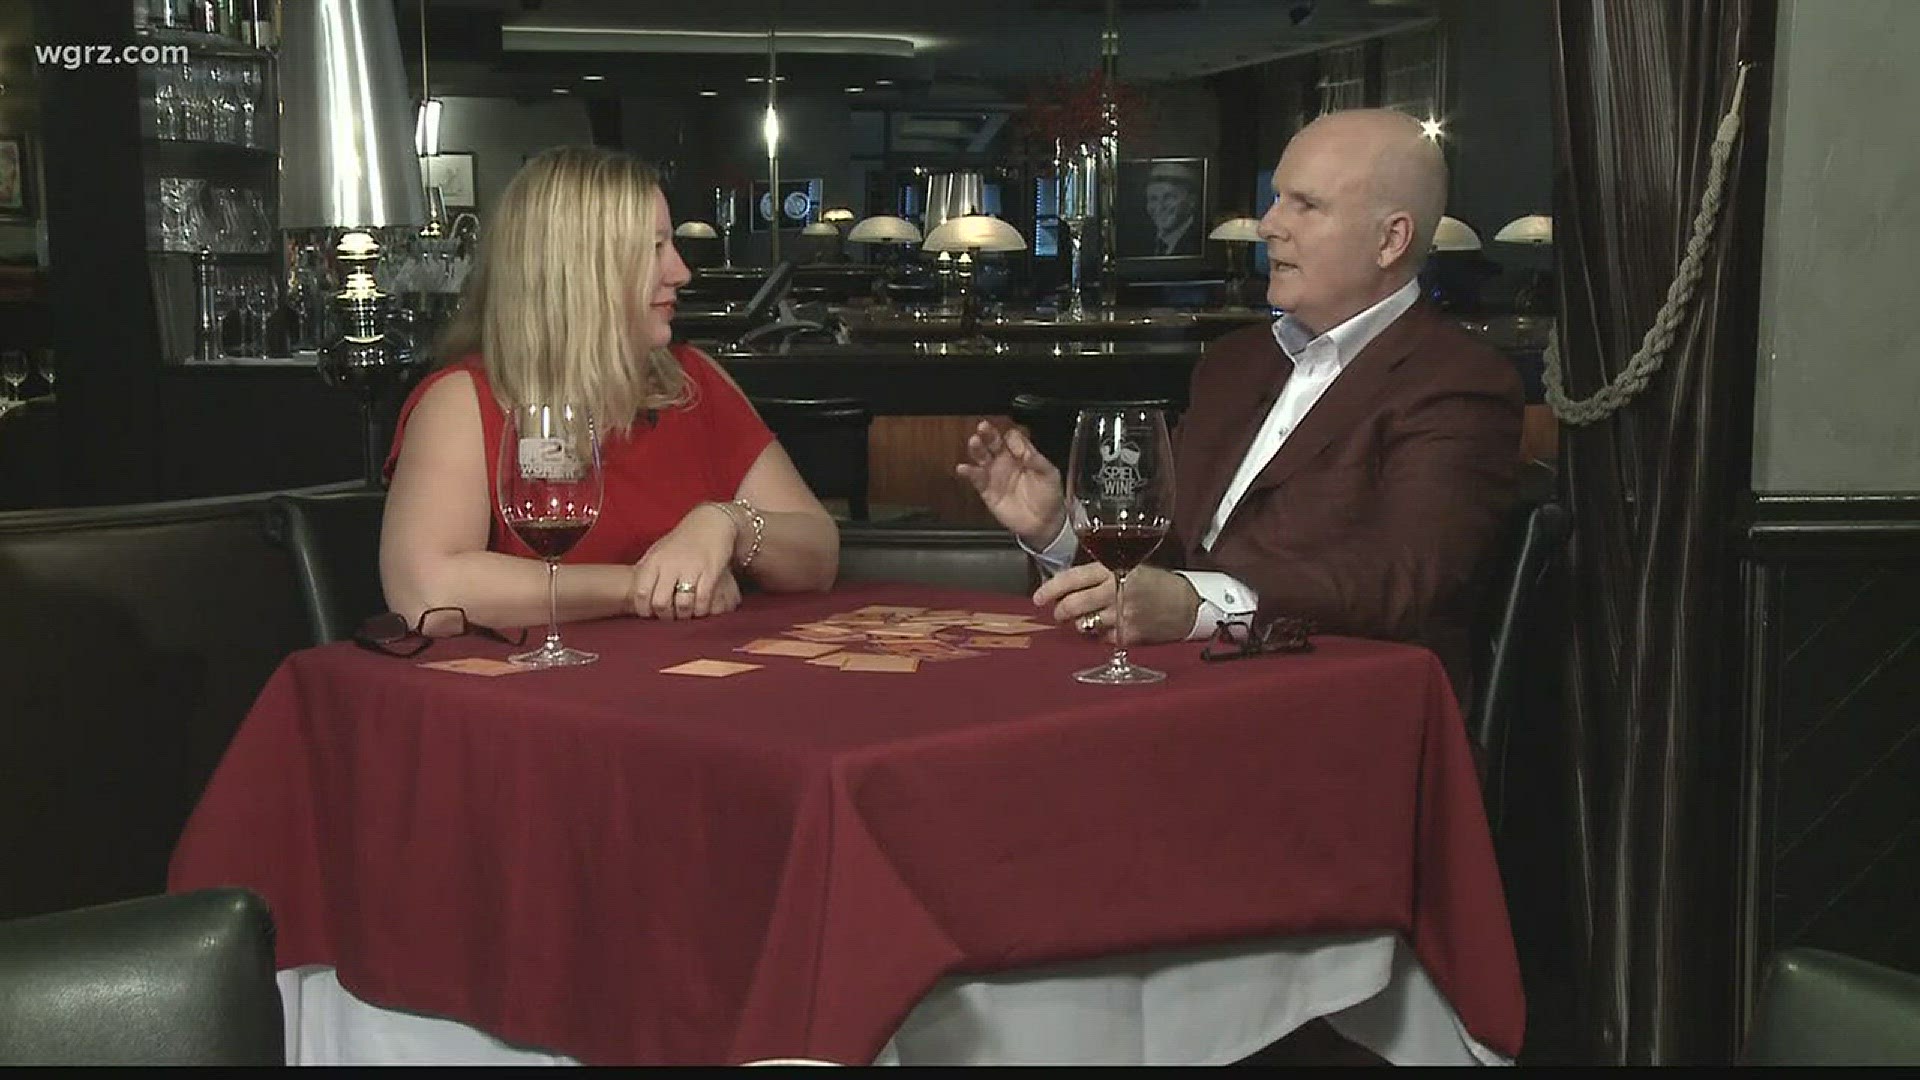 Kevin plays a wine card game with Donna Schlosser-Long